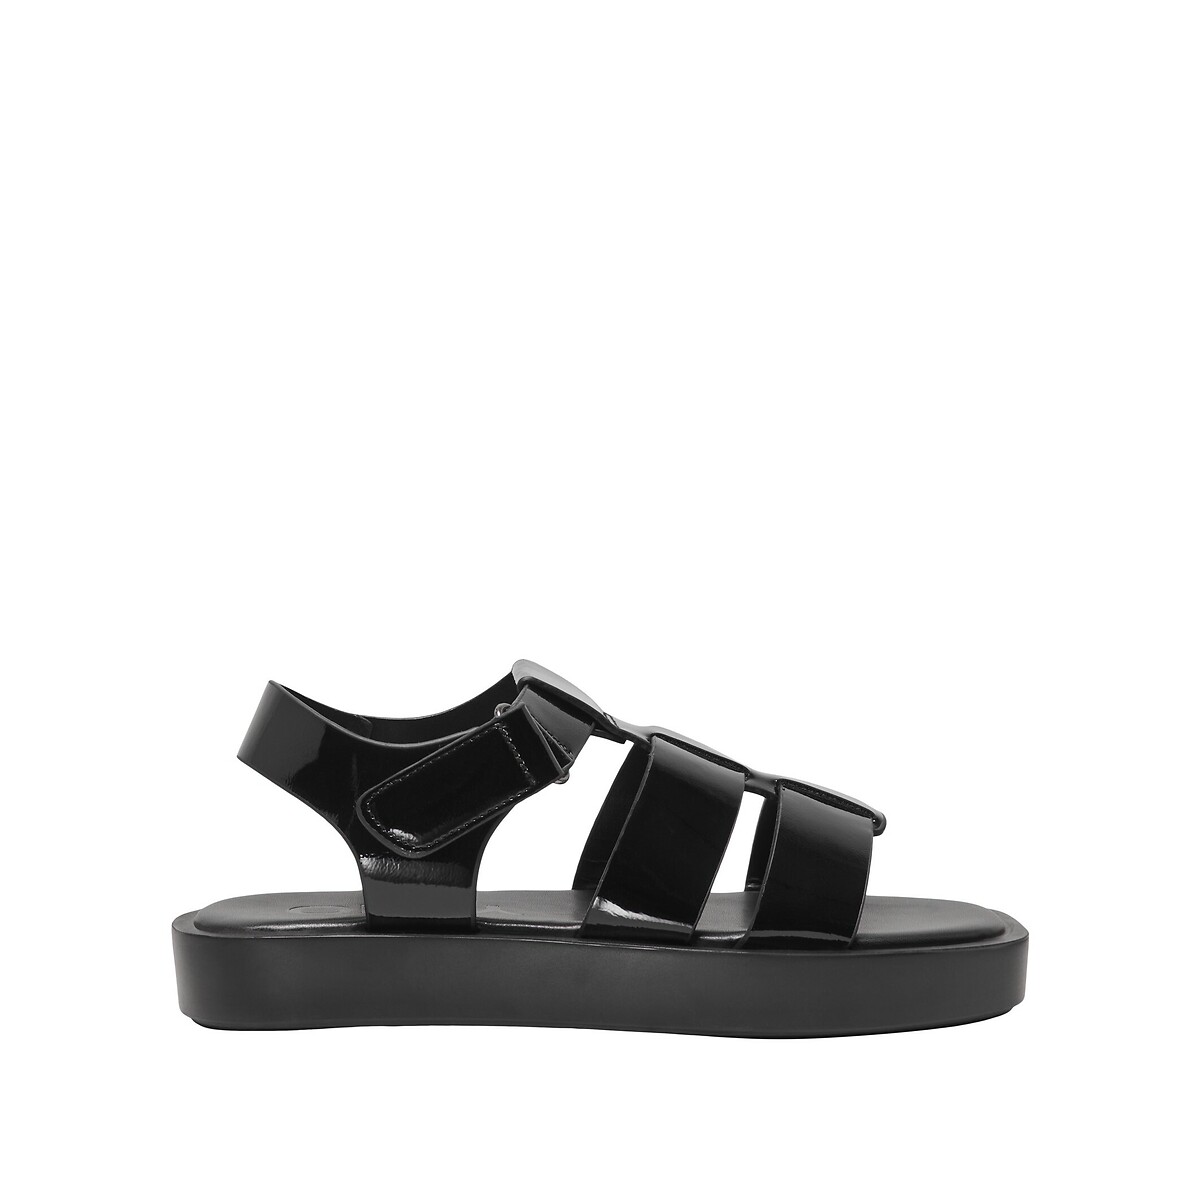 ONLY SHOES Sandalen Mica